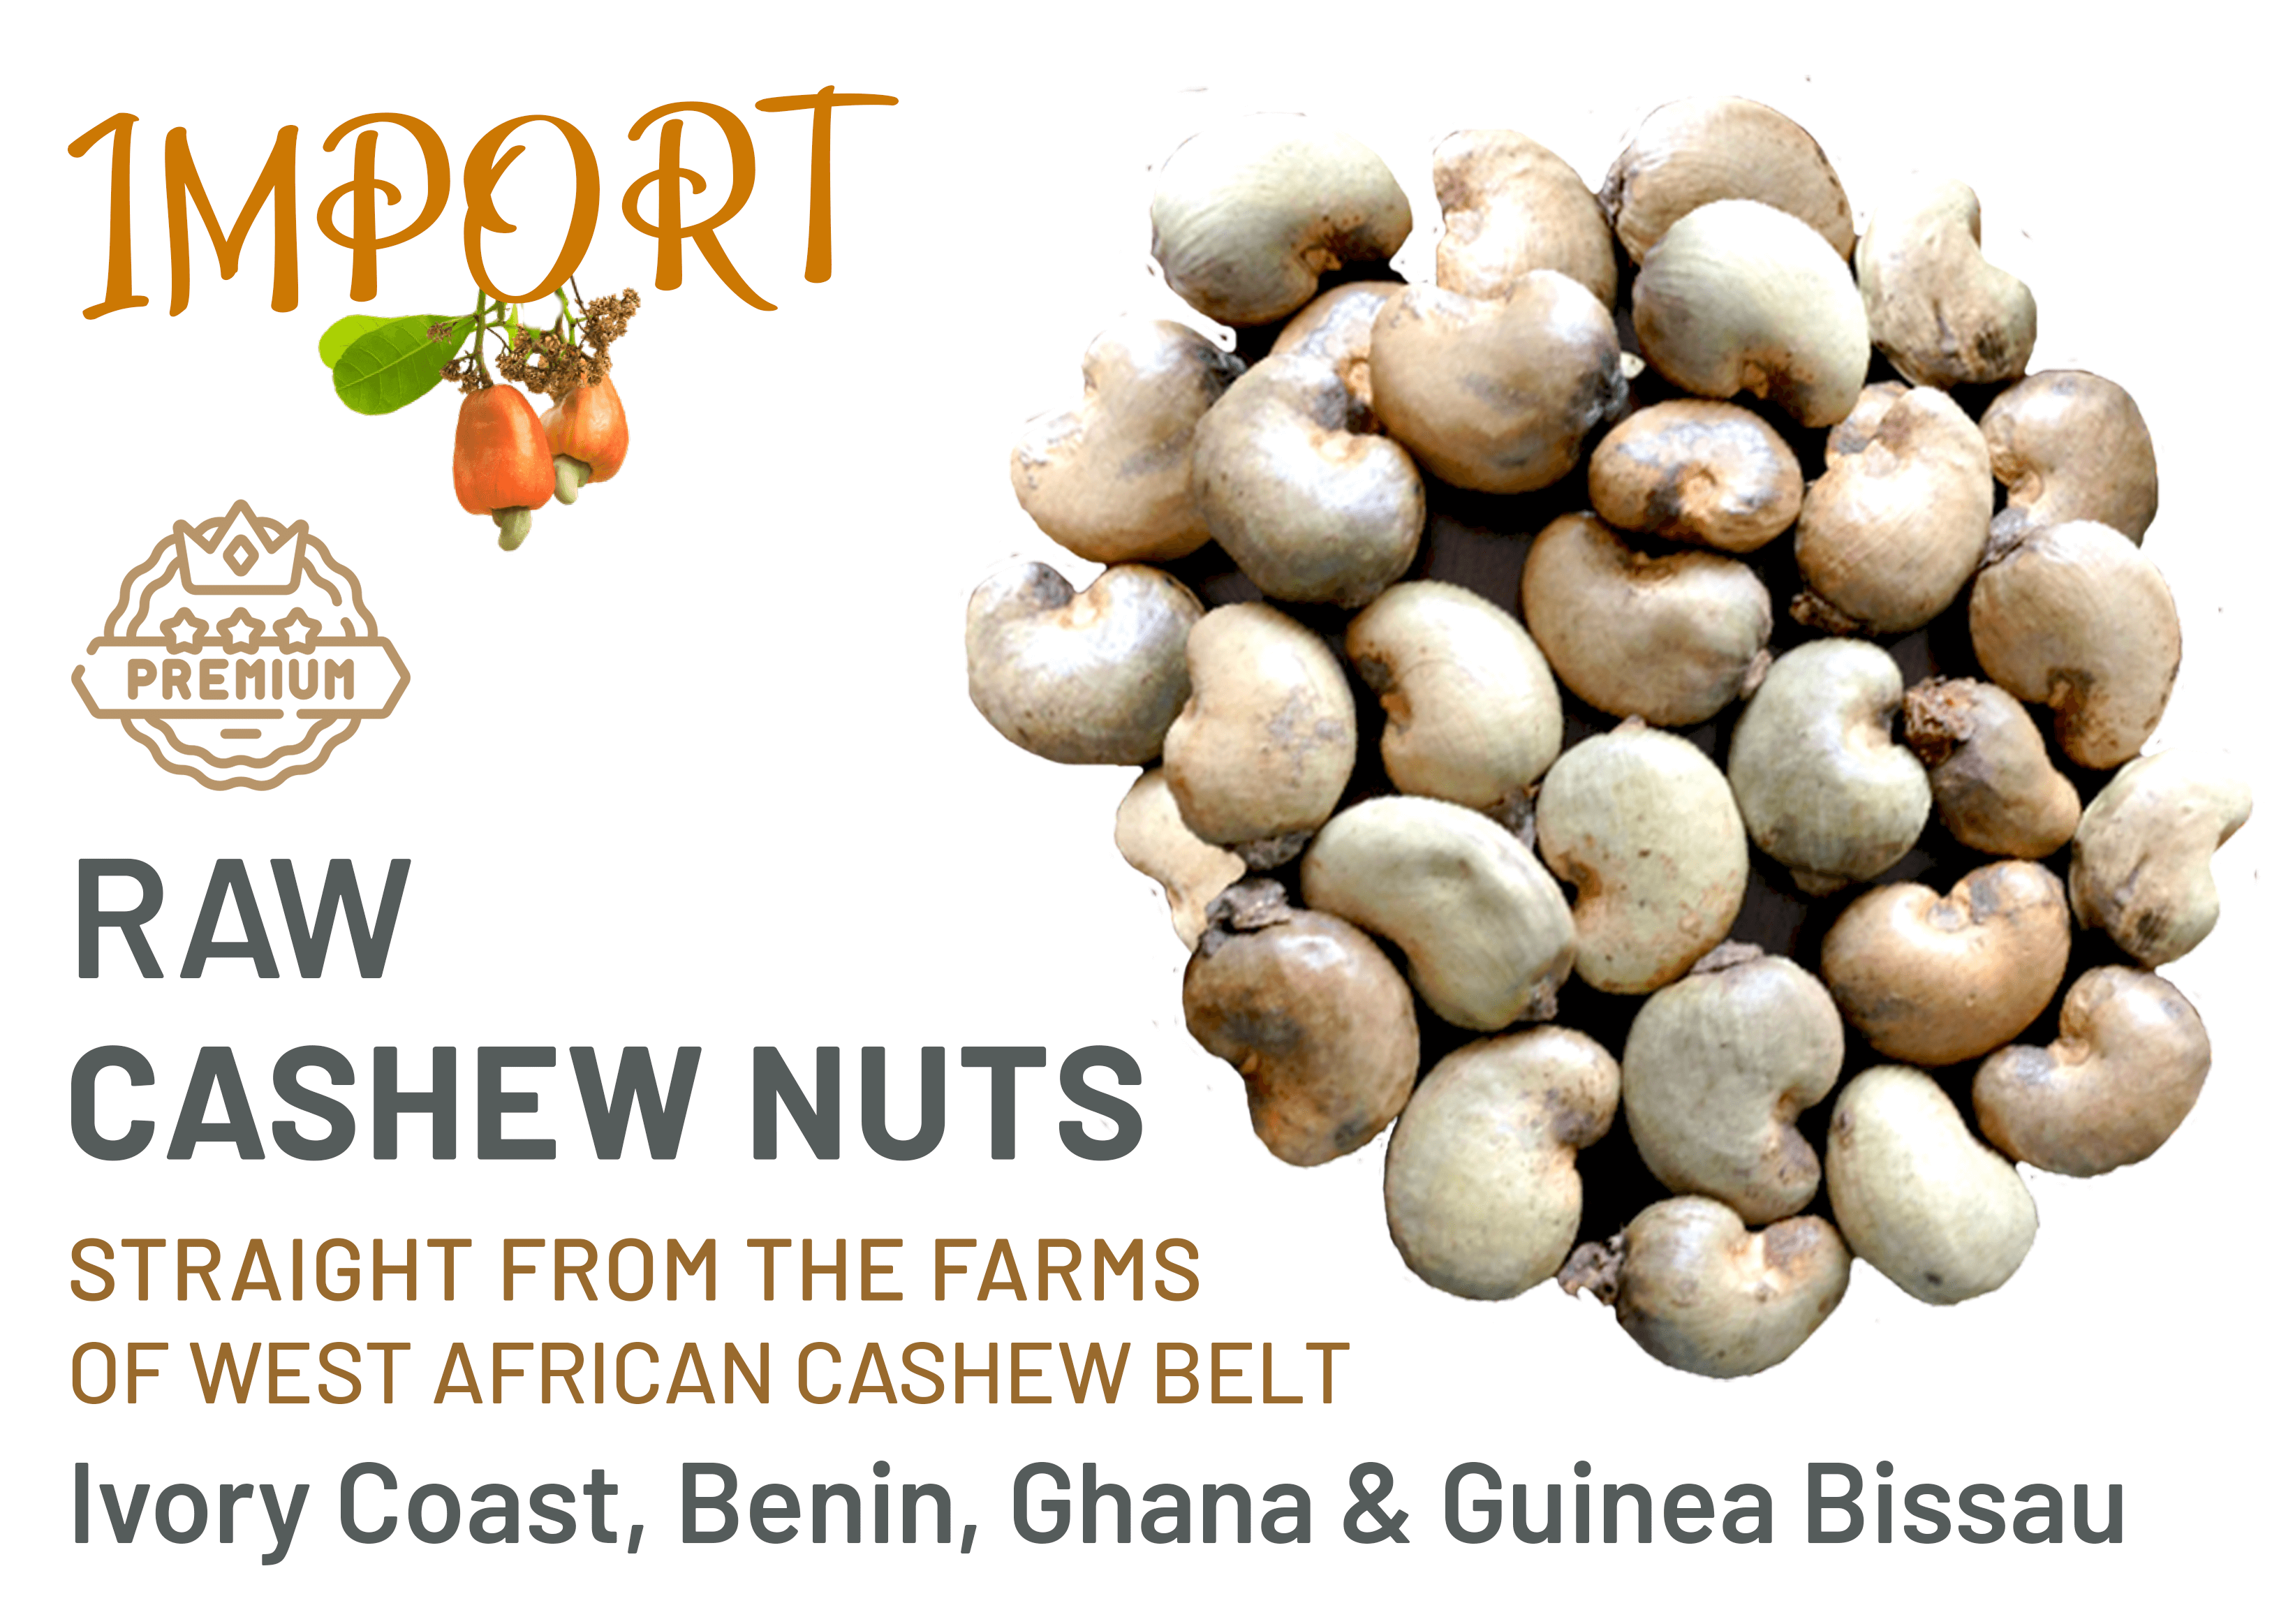 Raw Cashew Nuts and RCN Importers - Mudra Global